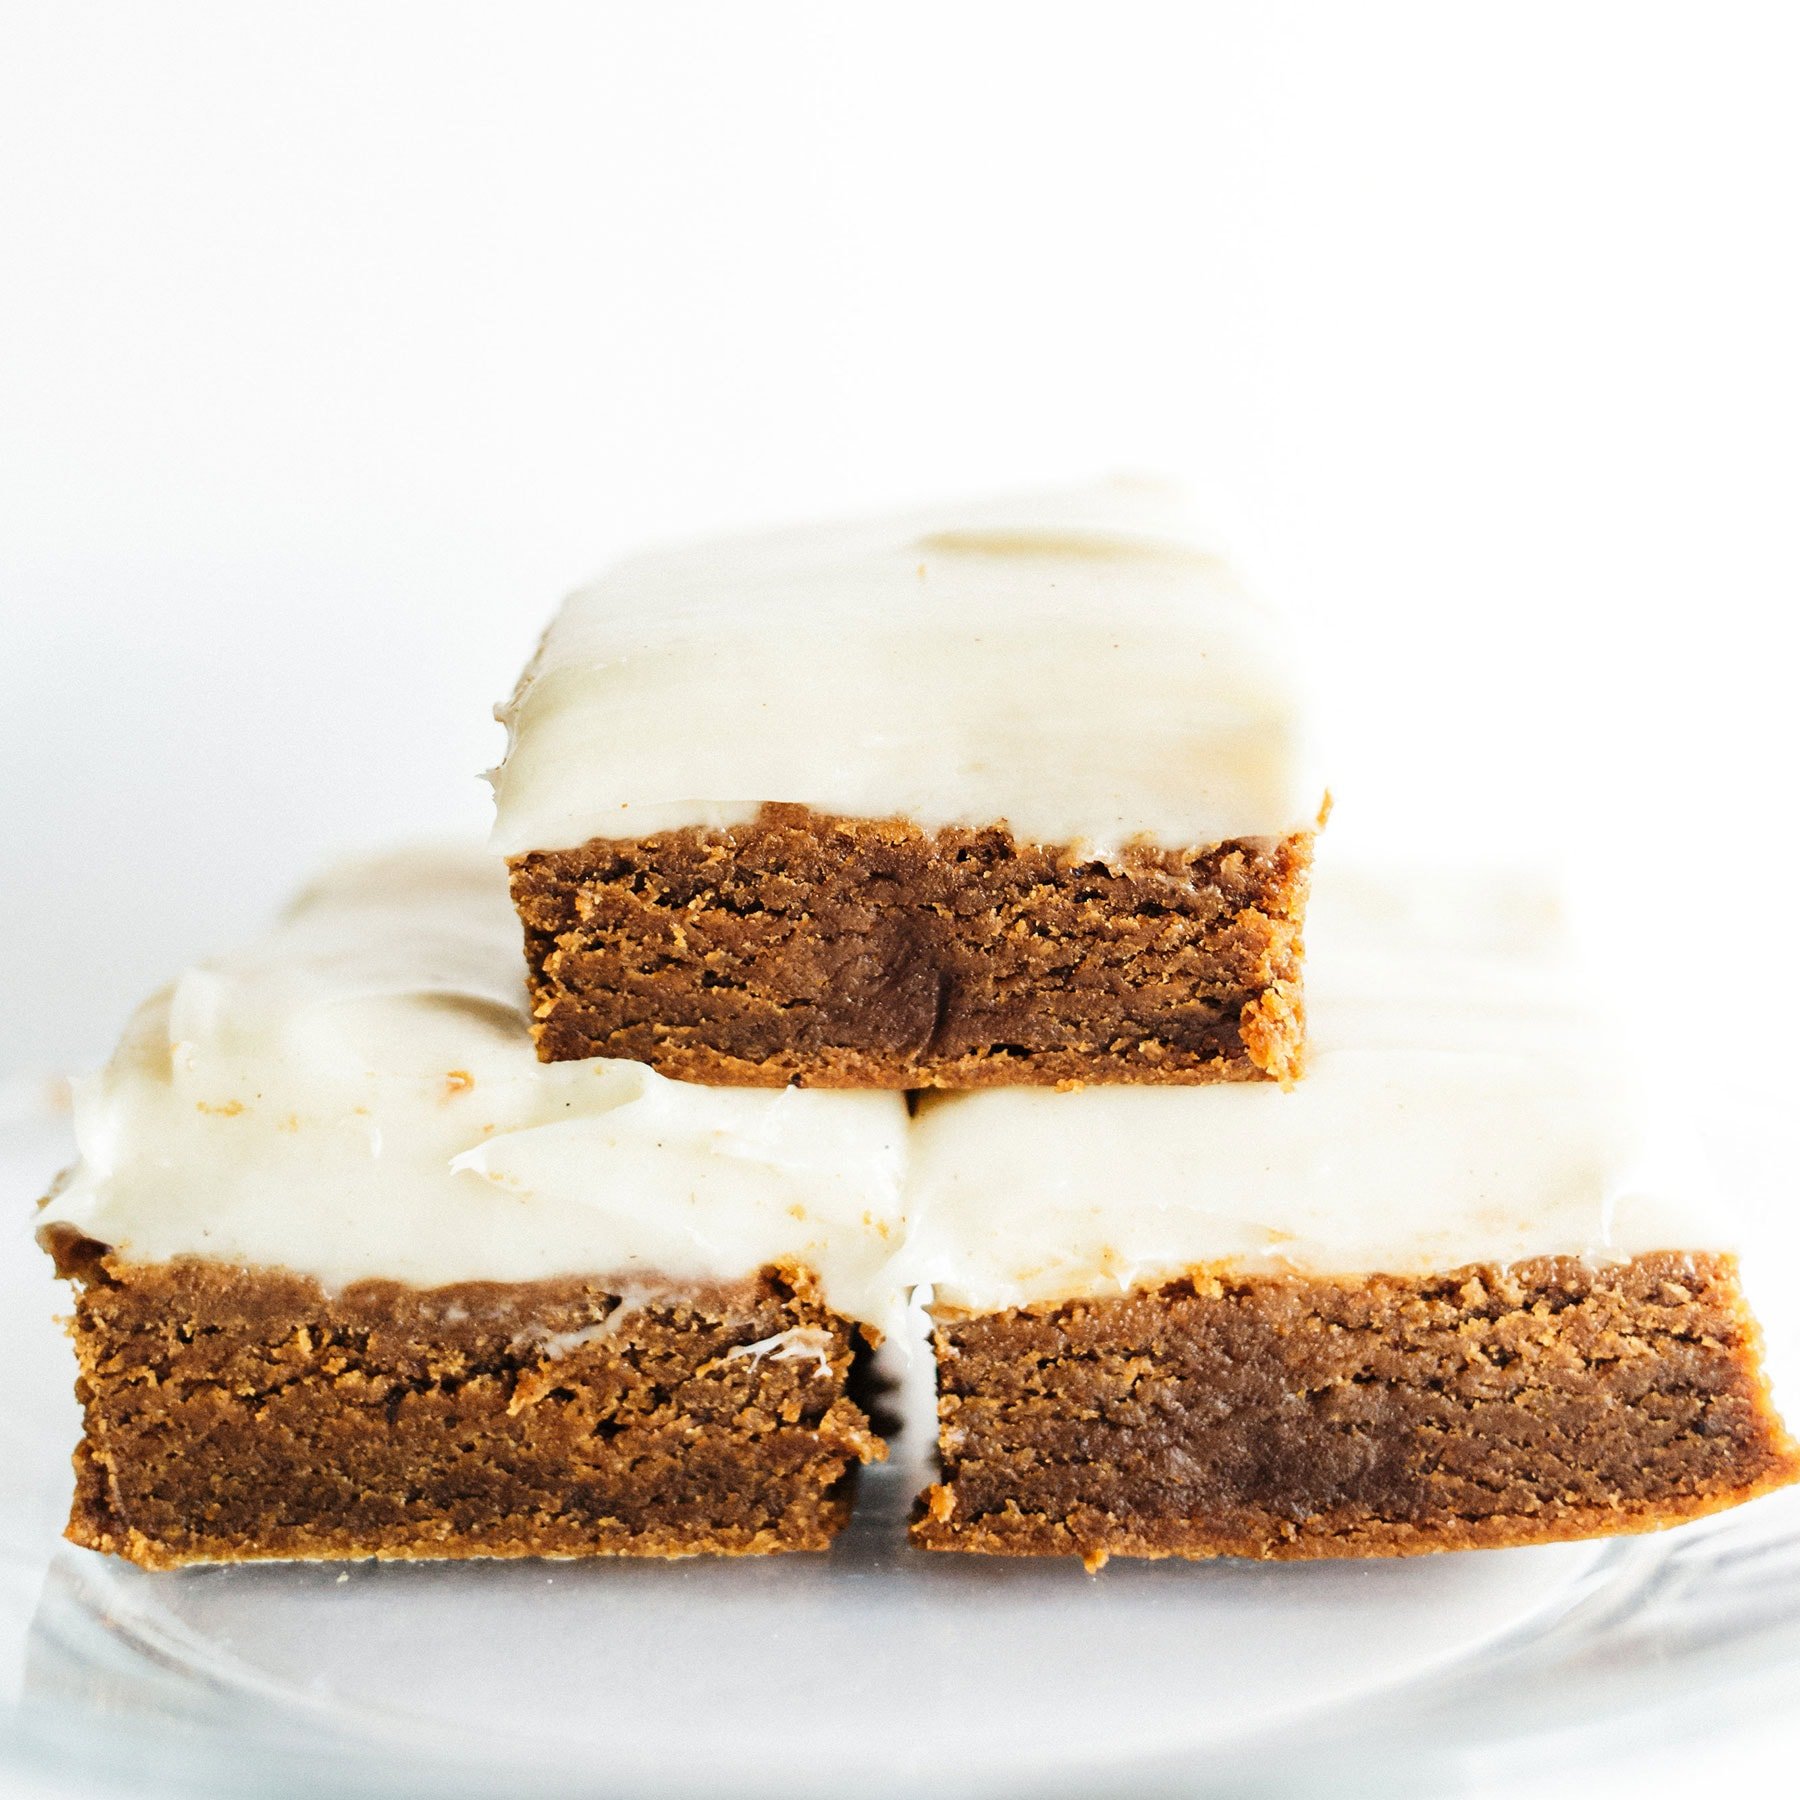 Gingerbread Cookie Bars with Cream Cheese Frosting are ultra thick, soft, and chewy with tons of aromatic spices and a generous layer of tangy frosting!